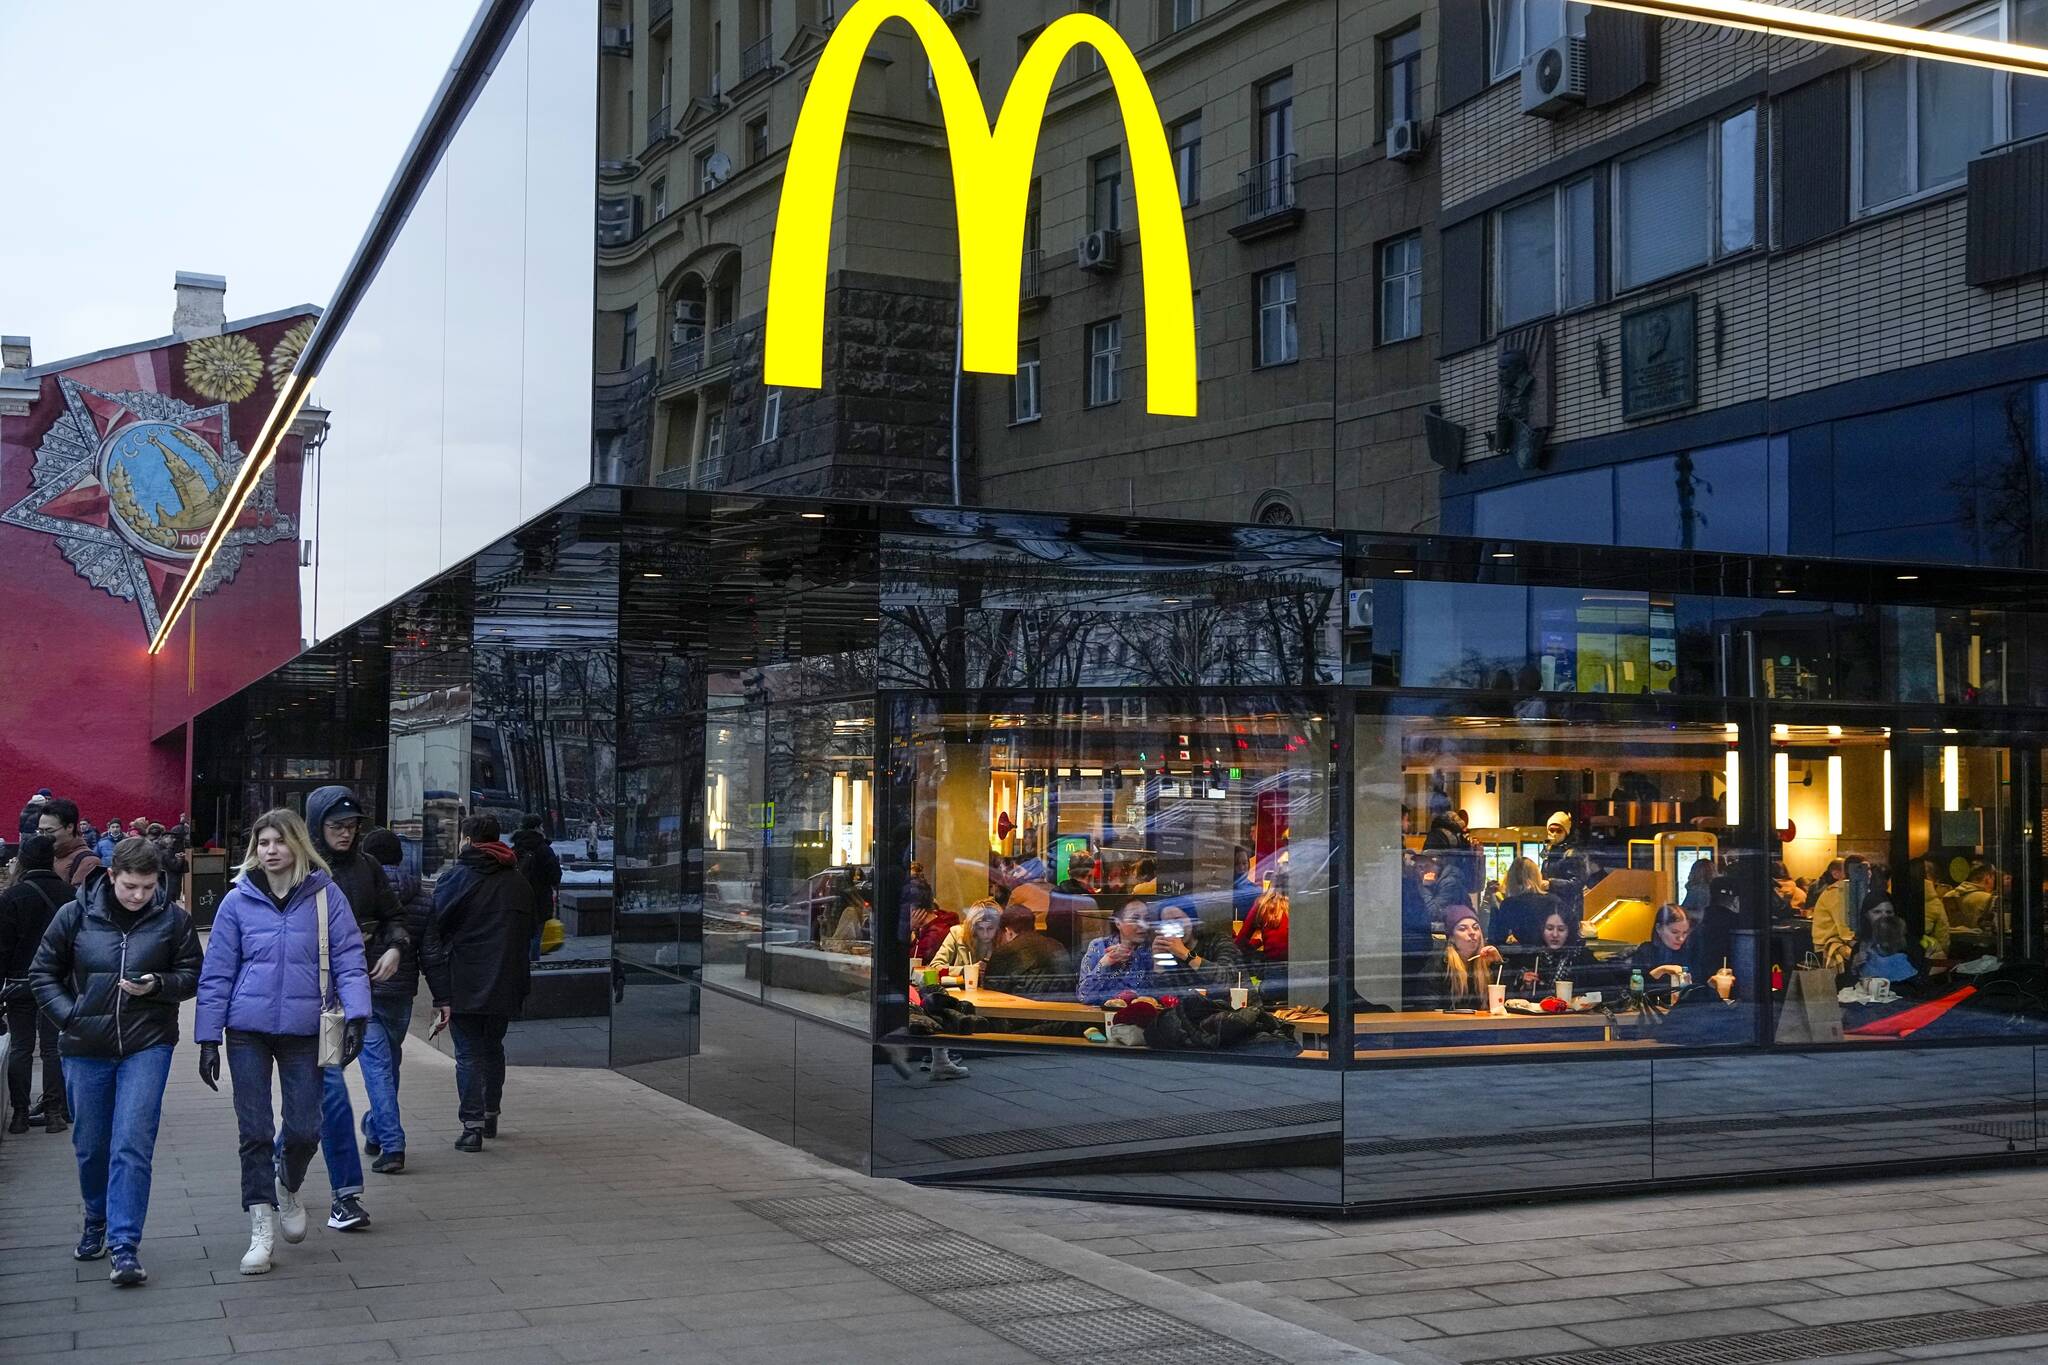 People eat in a McDonald’s restaurant in the main street in Moscow, Russia, Sunday, March 13, 2022. (AP Photo)